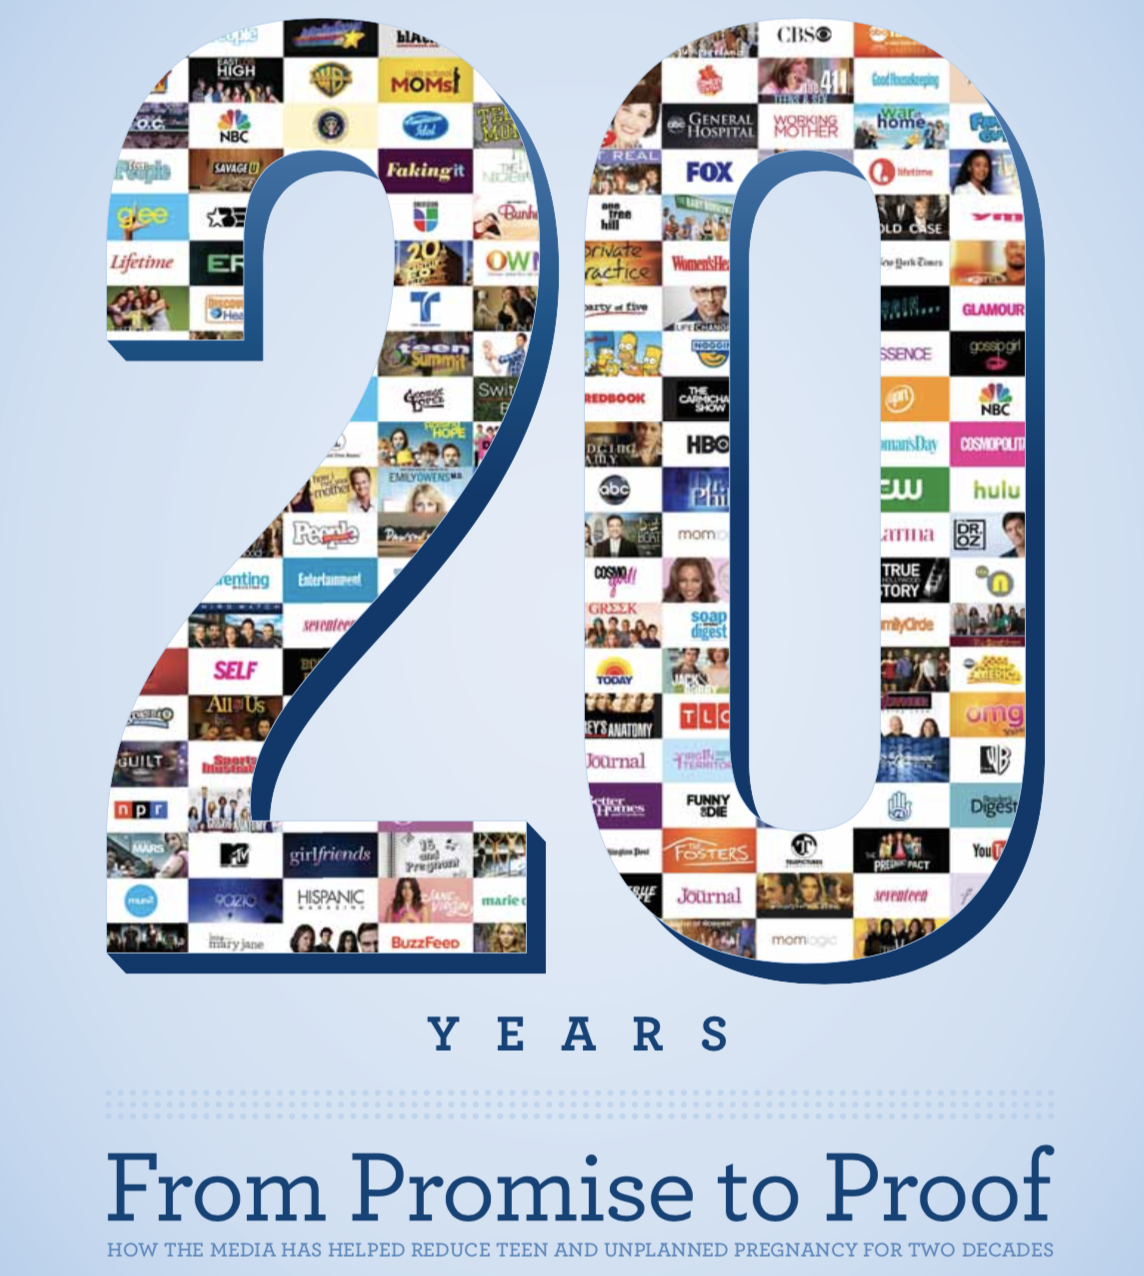 The cover of the report, "20 Years From Proof to Promise"